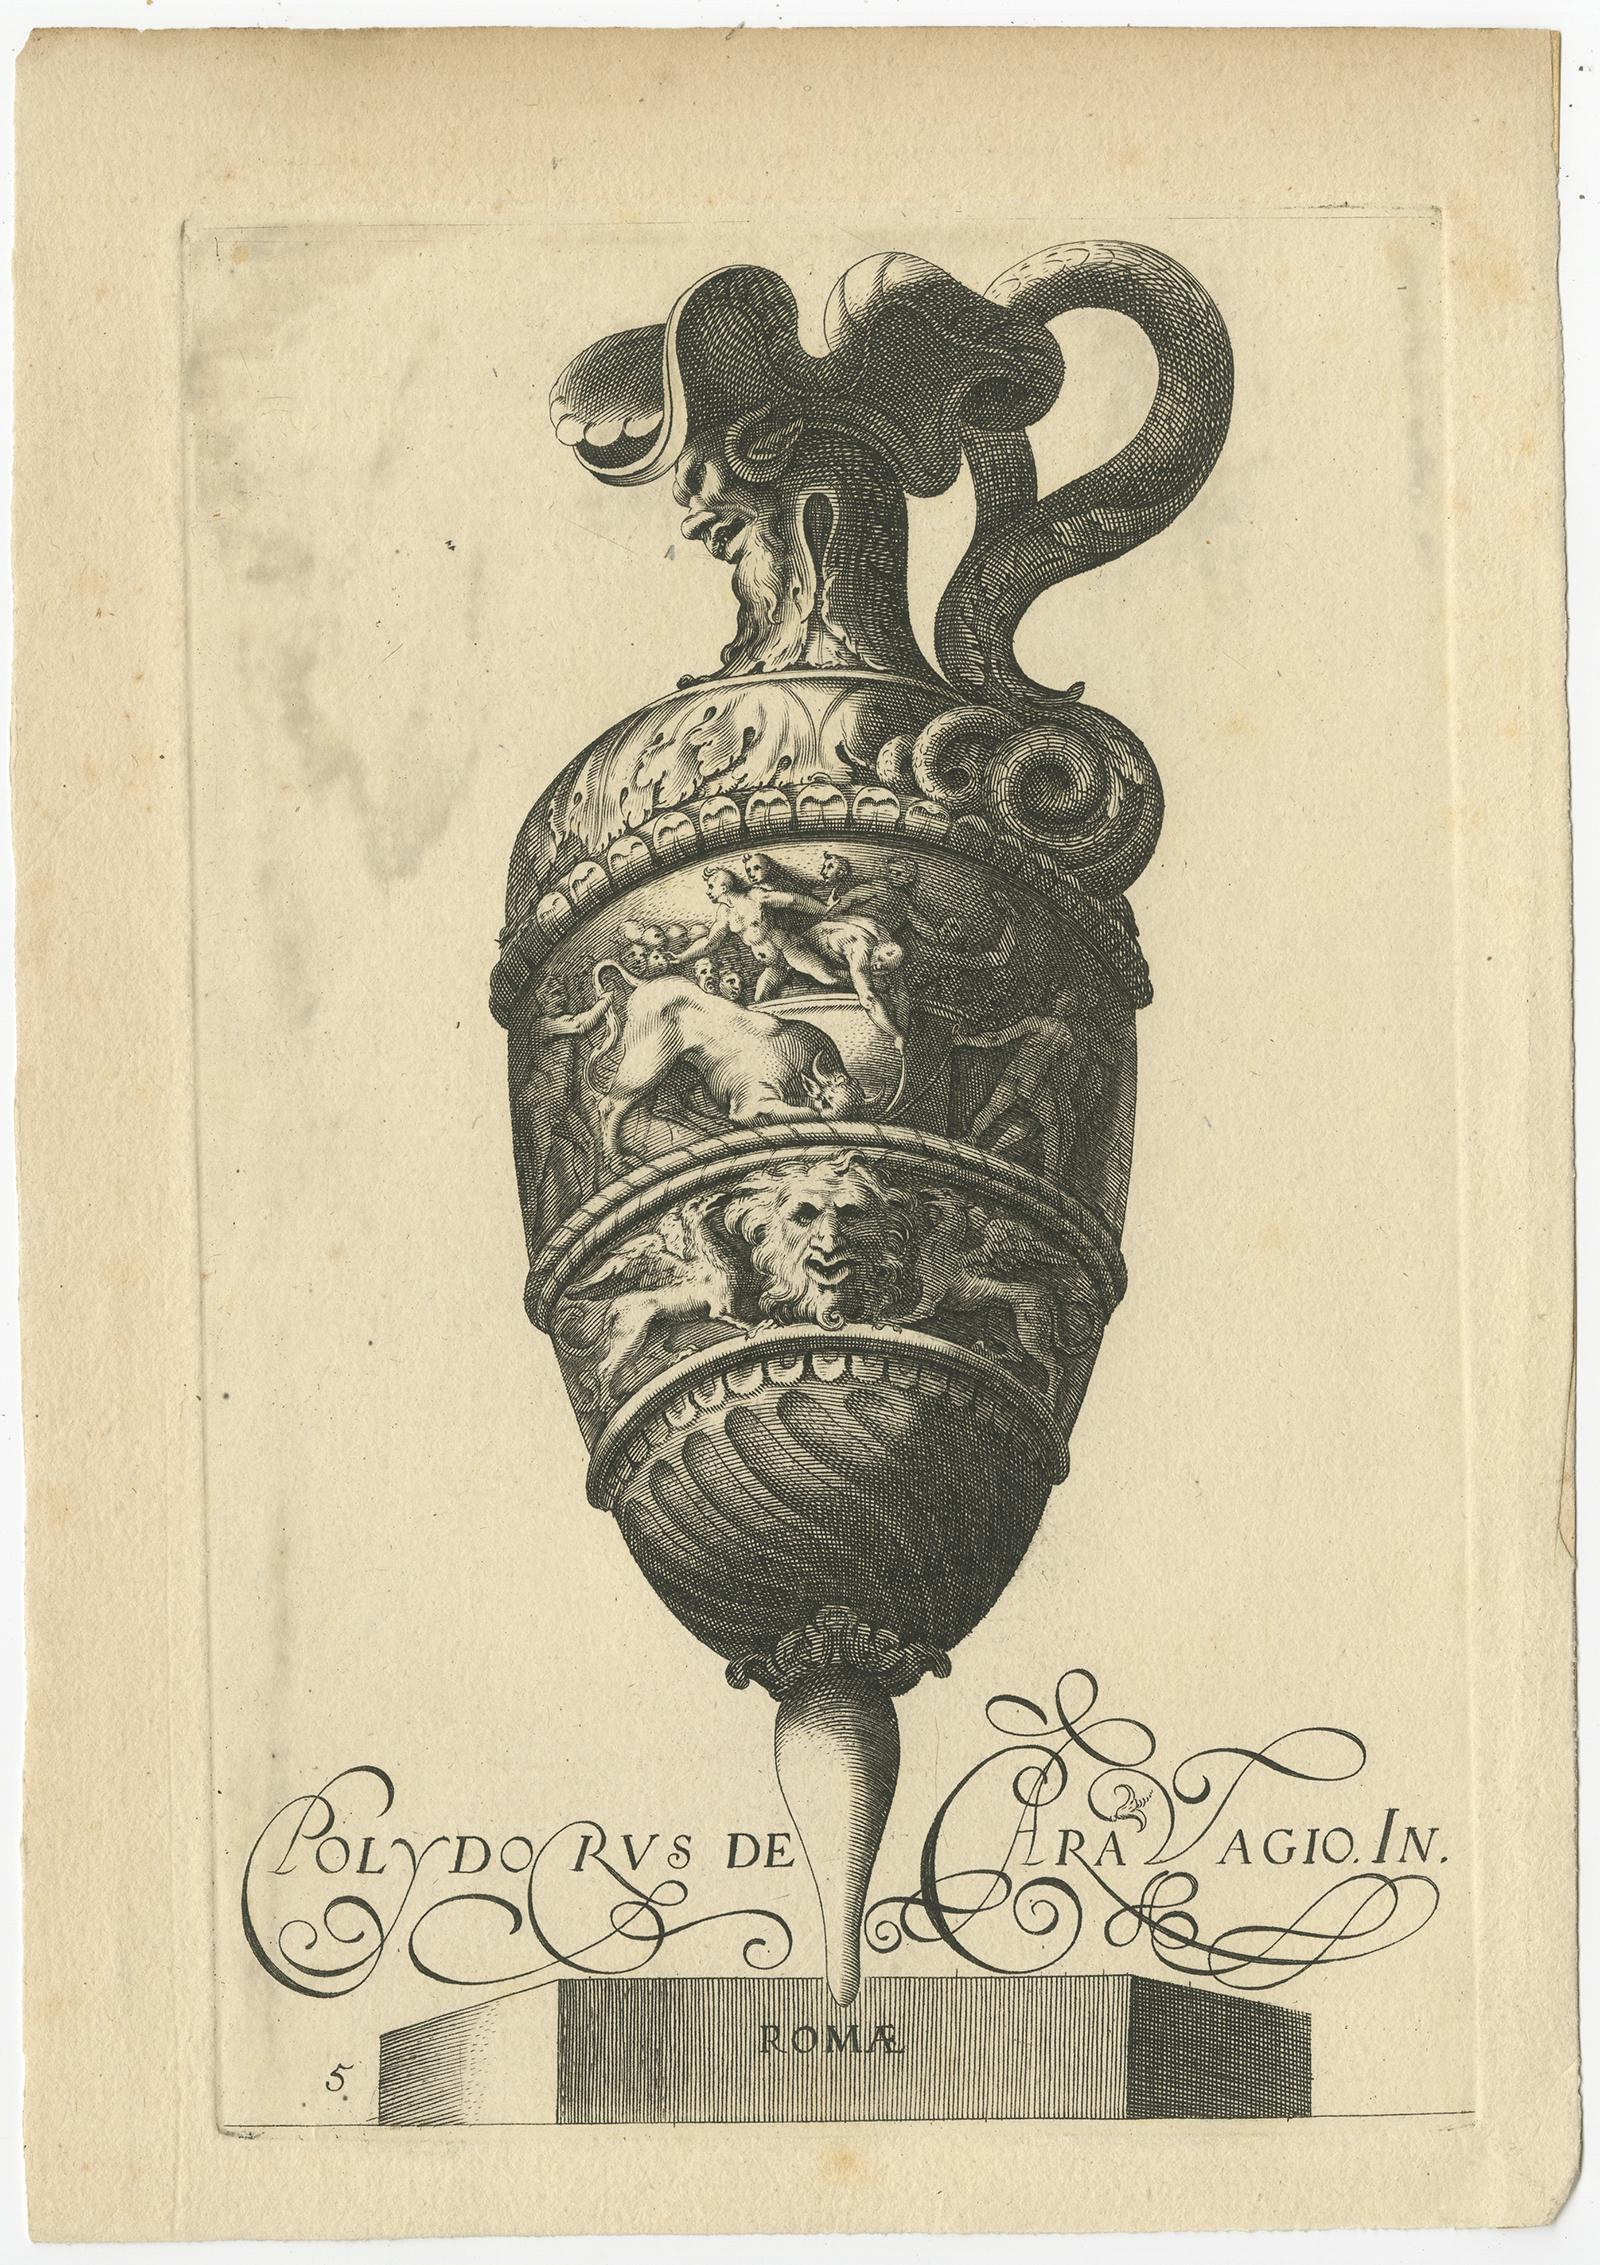 Set of two antique prints titled 'Polydorius de Caravagio'. Plate 5 and 9 depicting decorated antique vases. Source unknown, to determined.